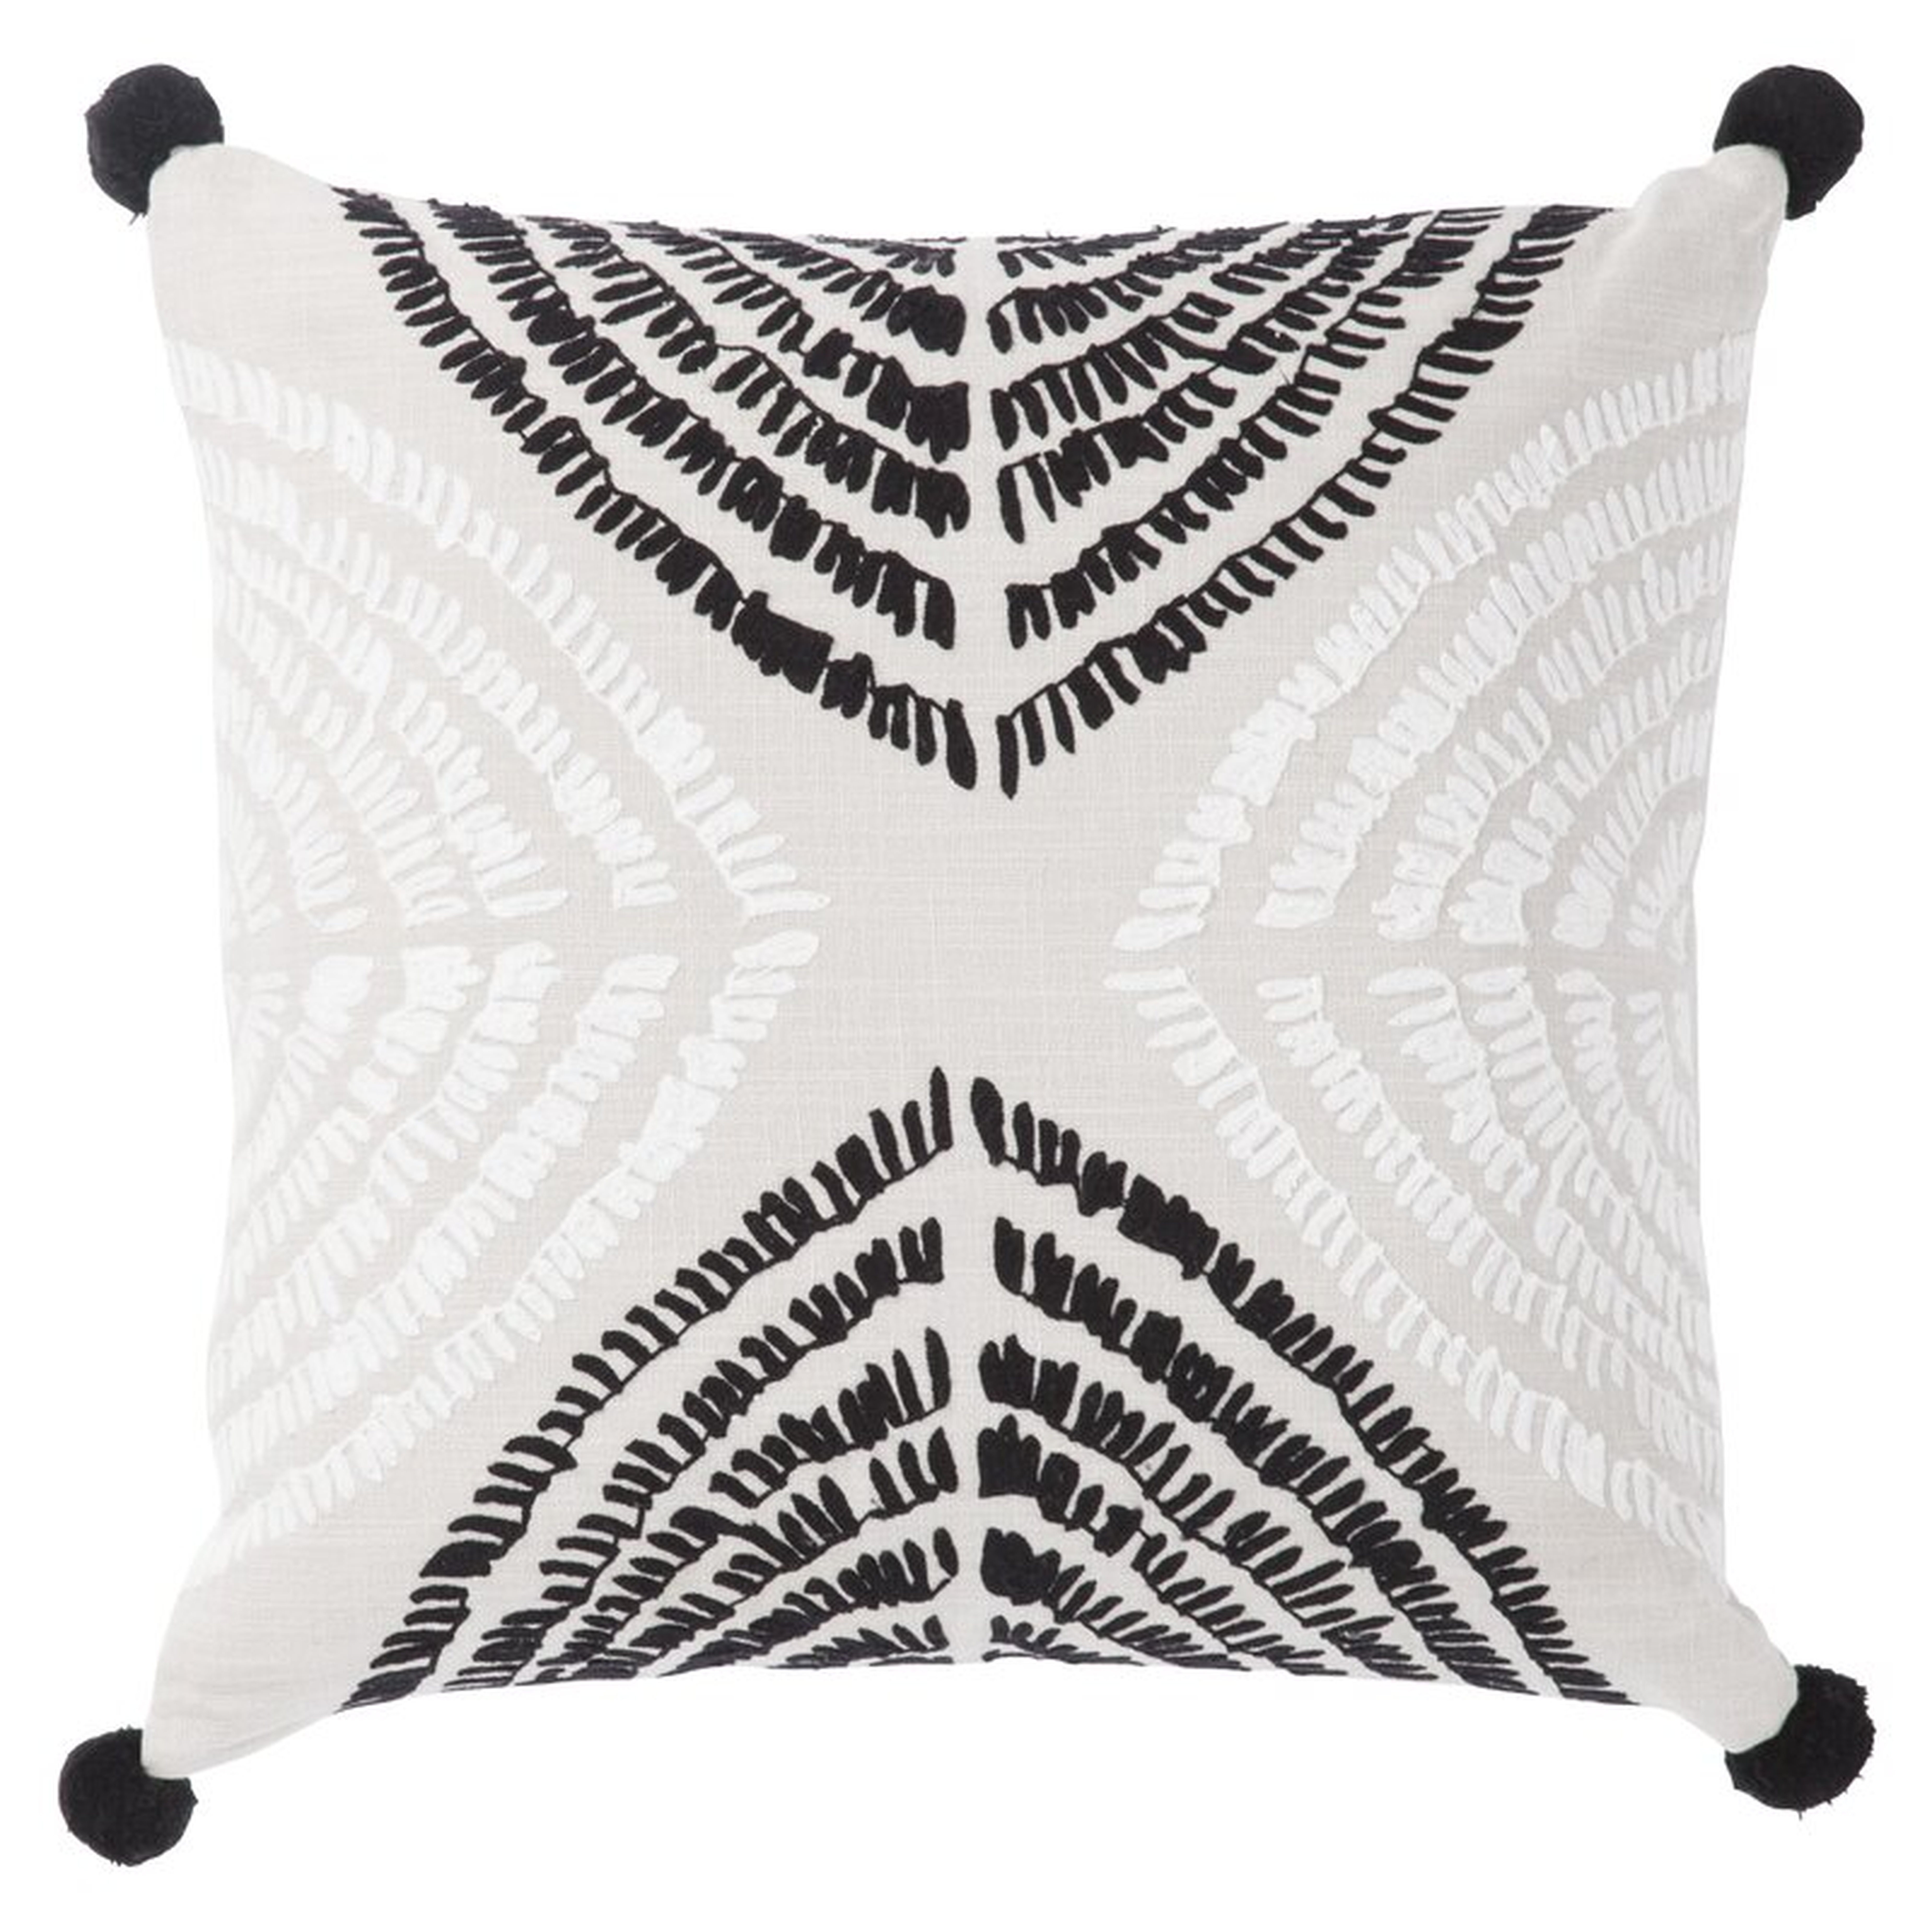 Cosmic By Nikki Chu Living Angelika Textured Linen Throw Pillow Color: Black/Silver, Fill: Polyester / Polyfill - Perigold